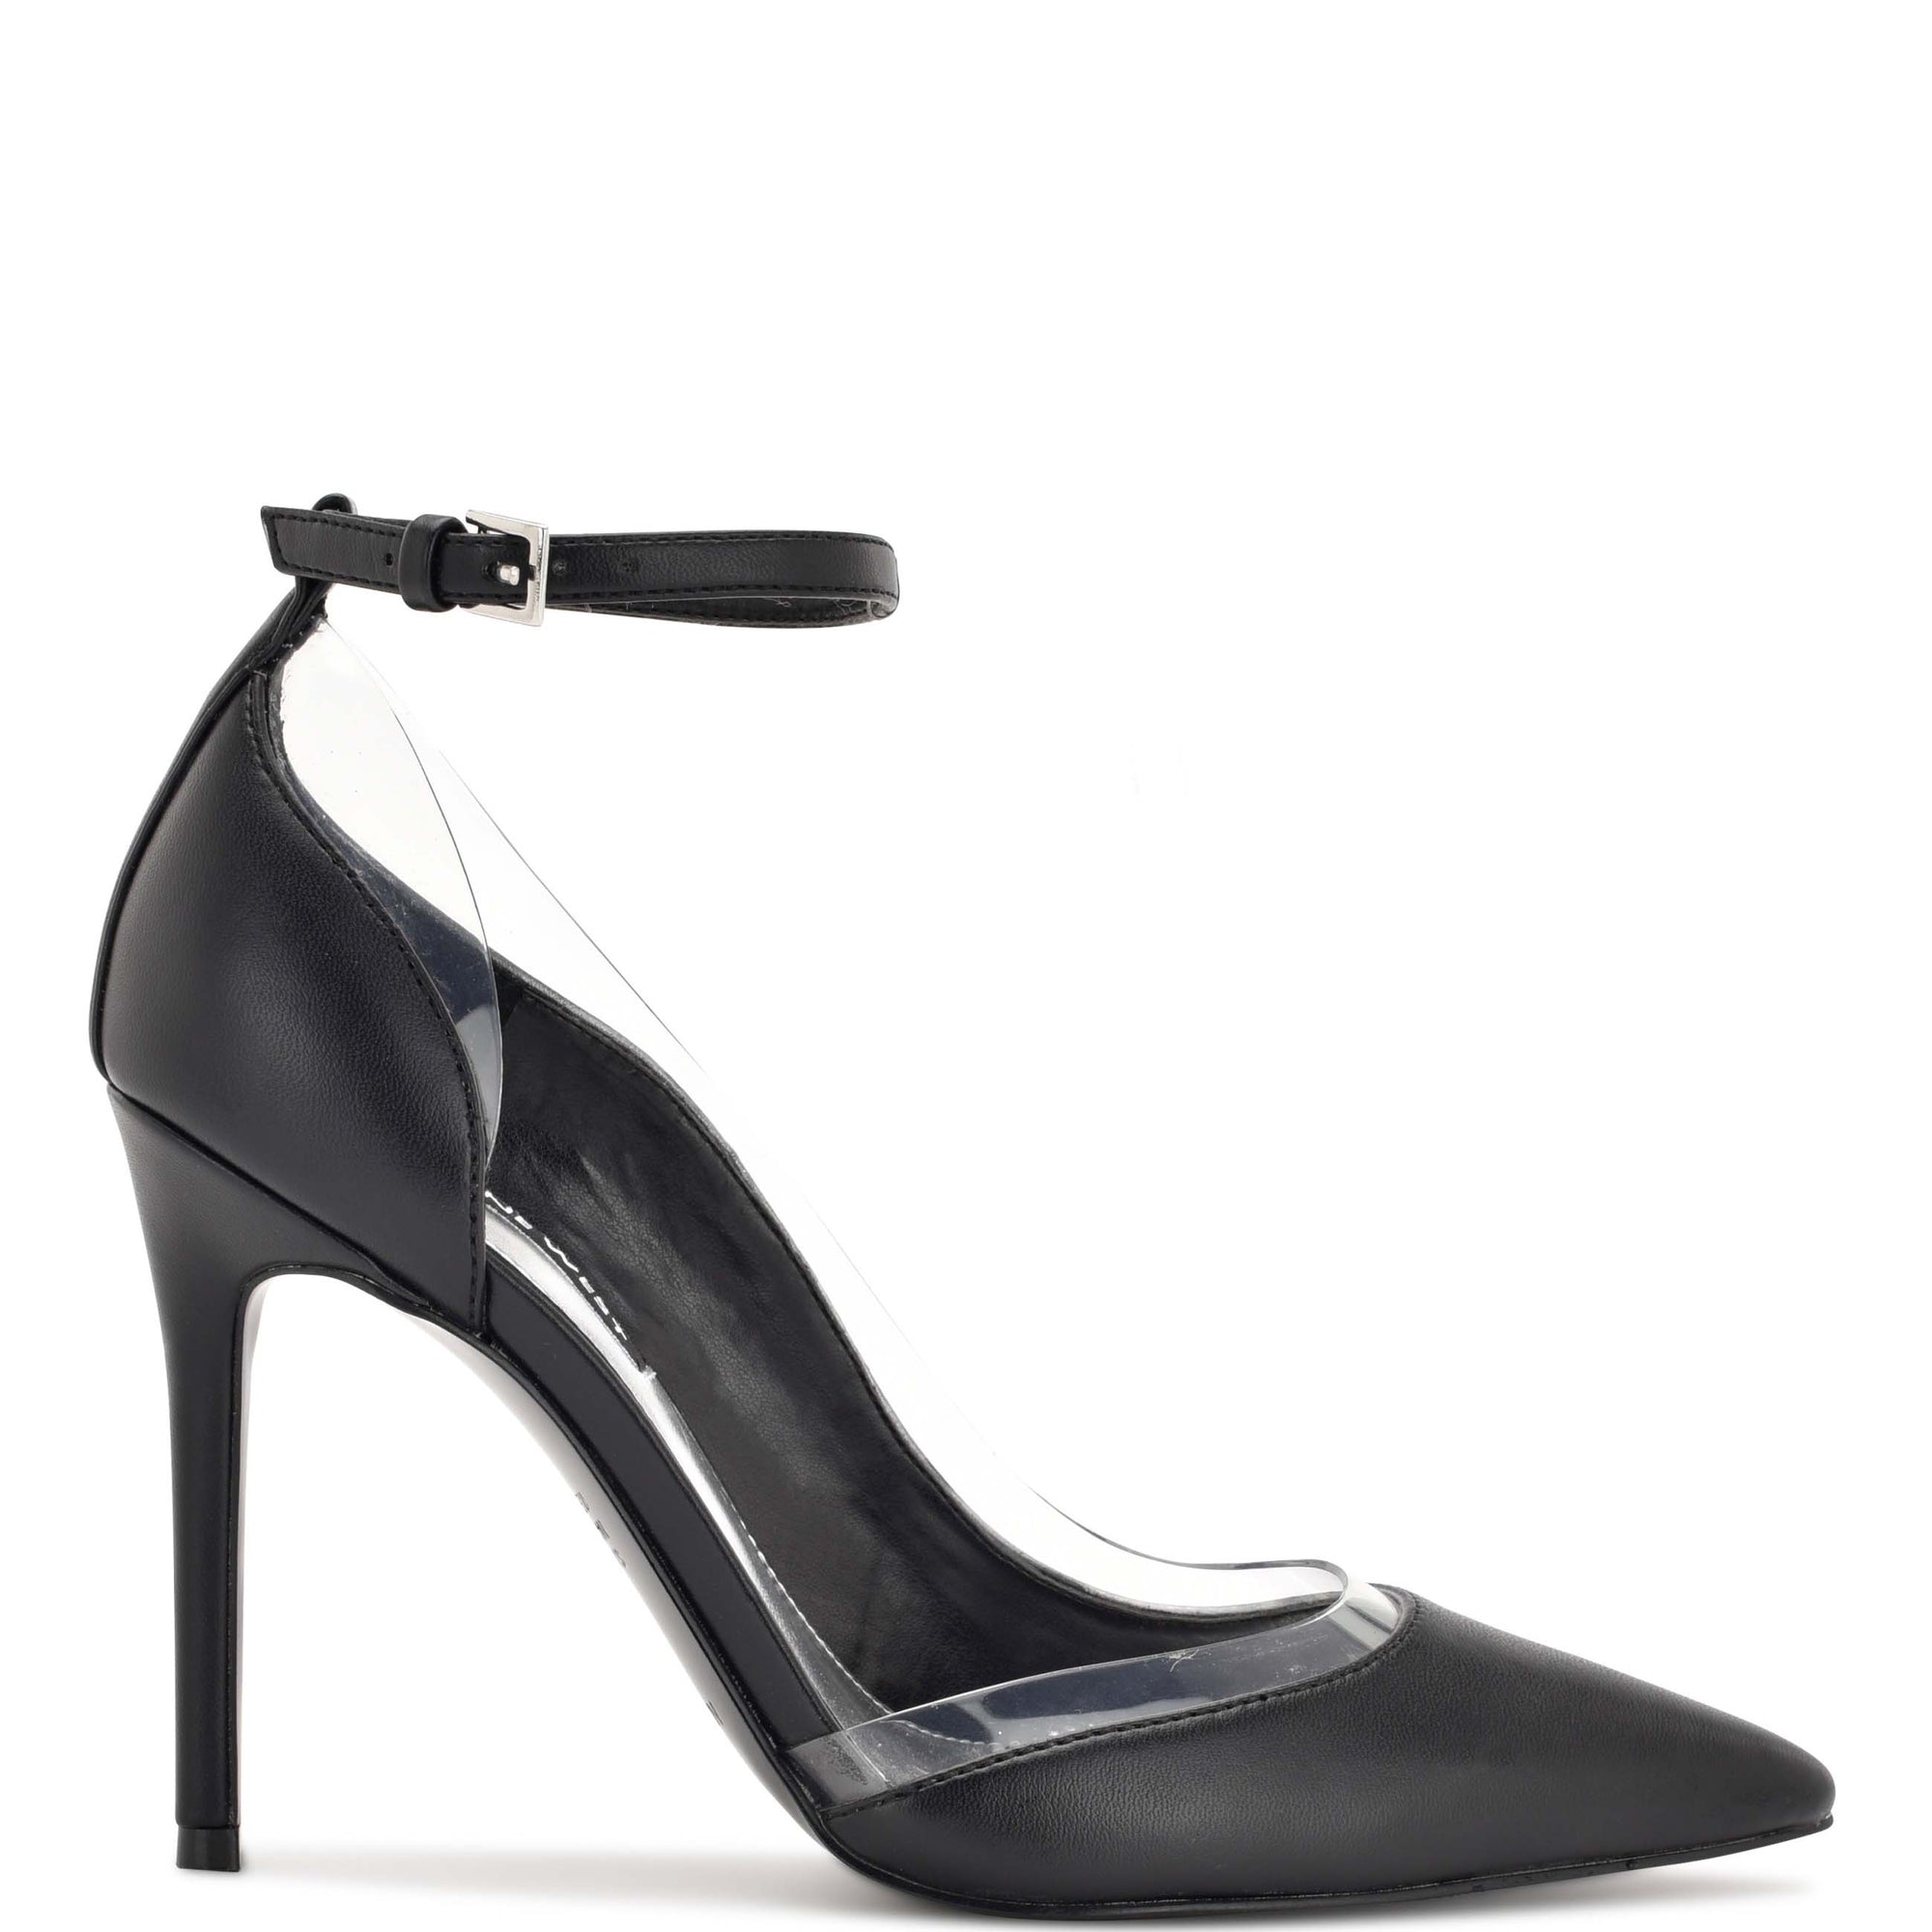 Nine West Silver Multi-Strap Aves Pump - Women, Best Price and Reviews